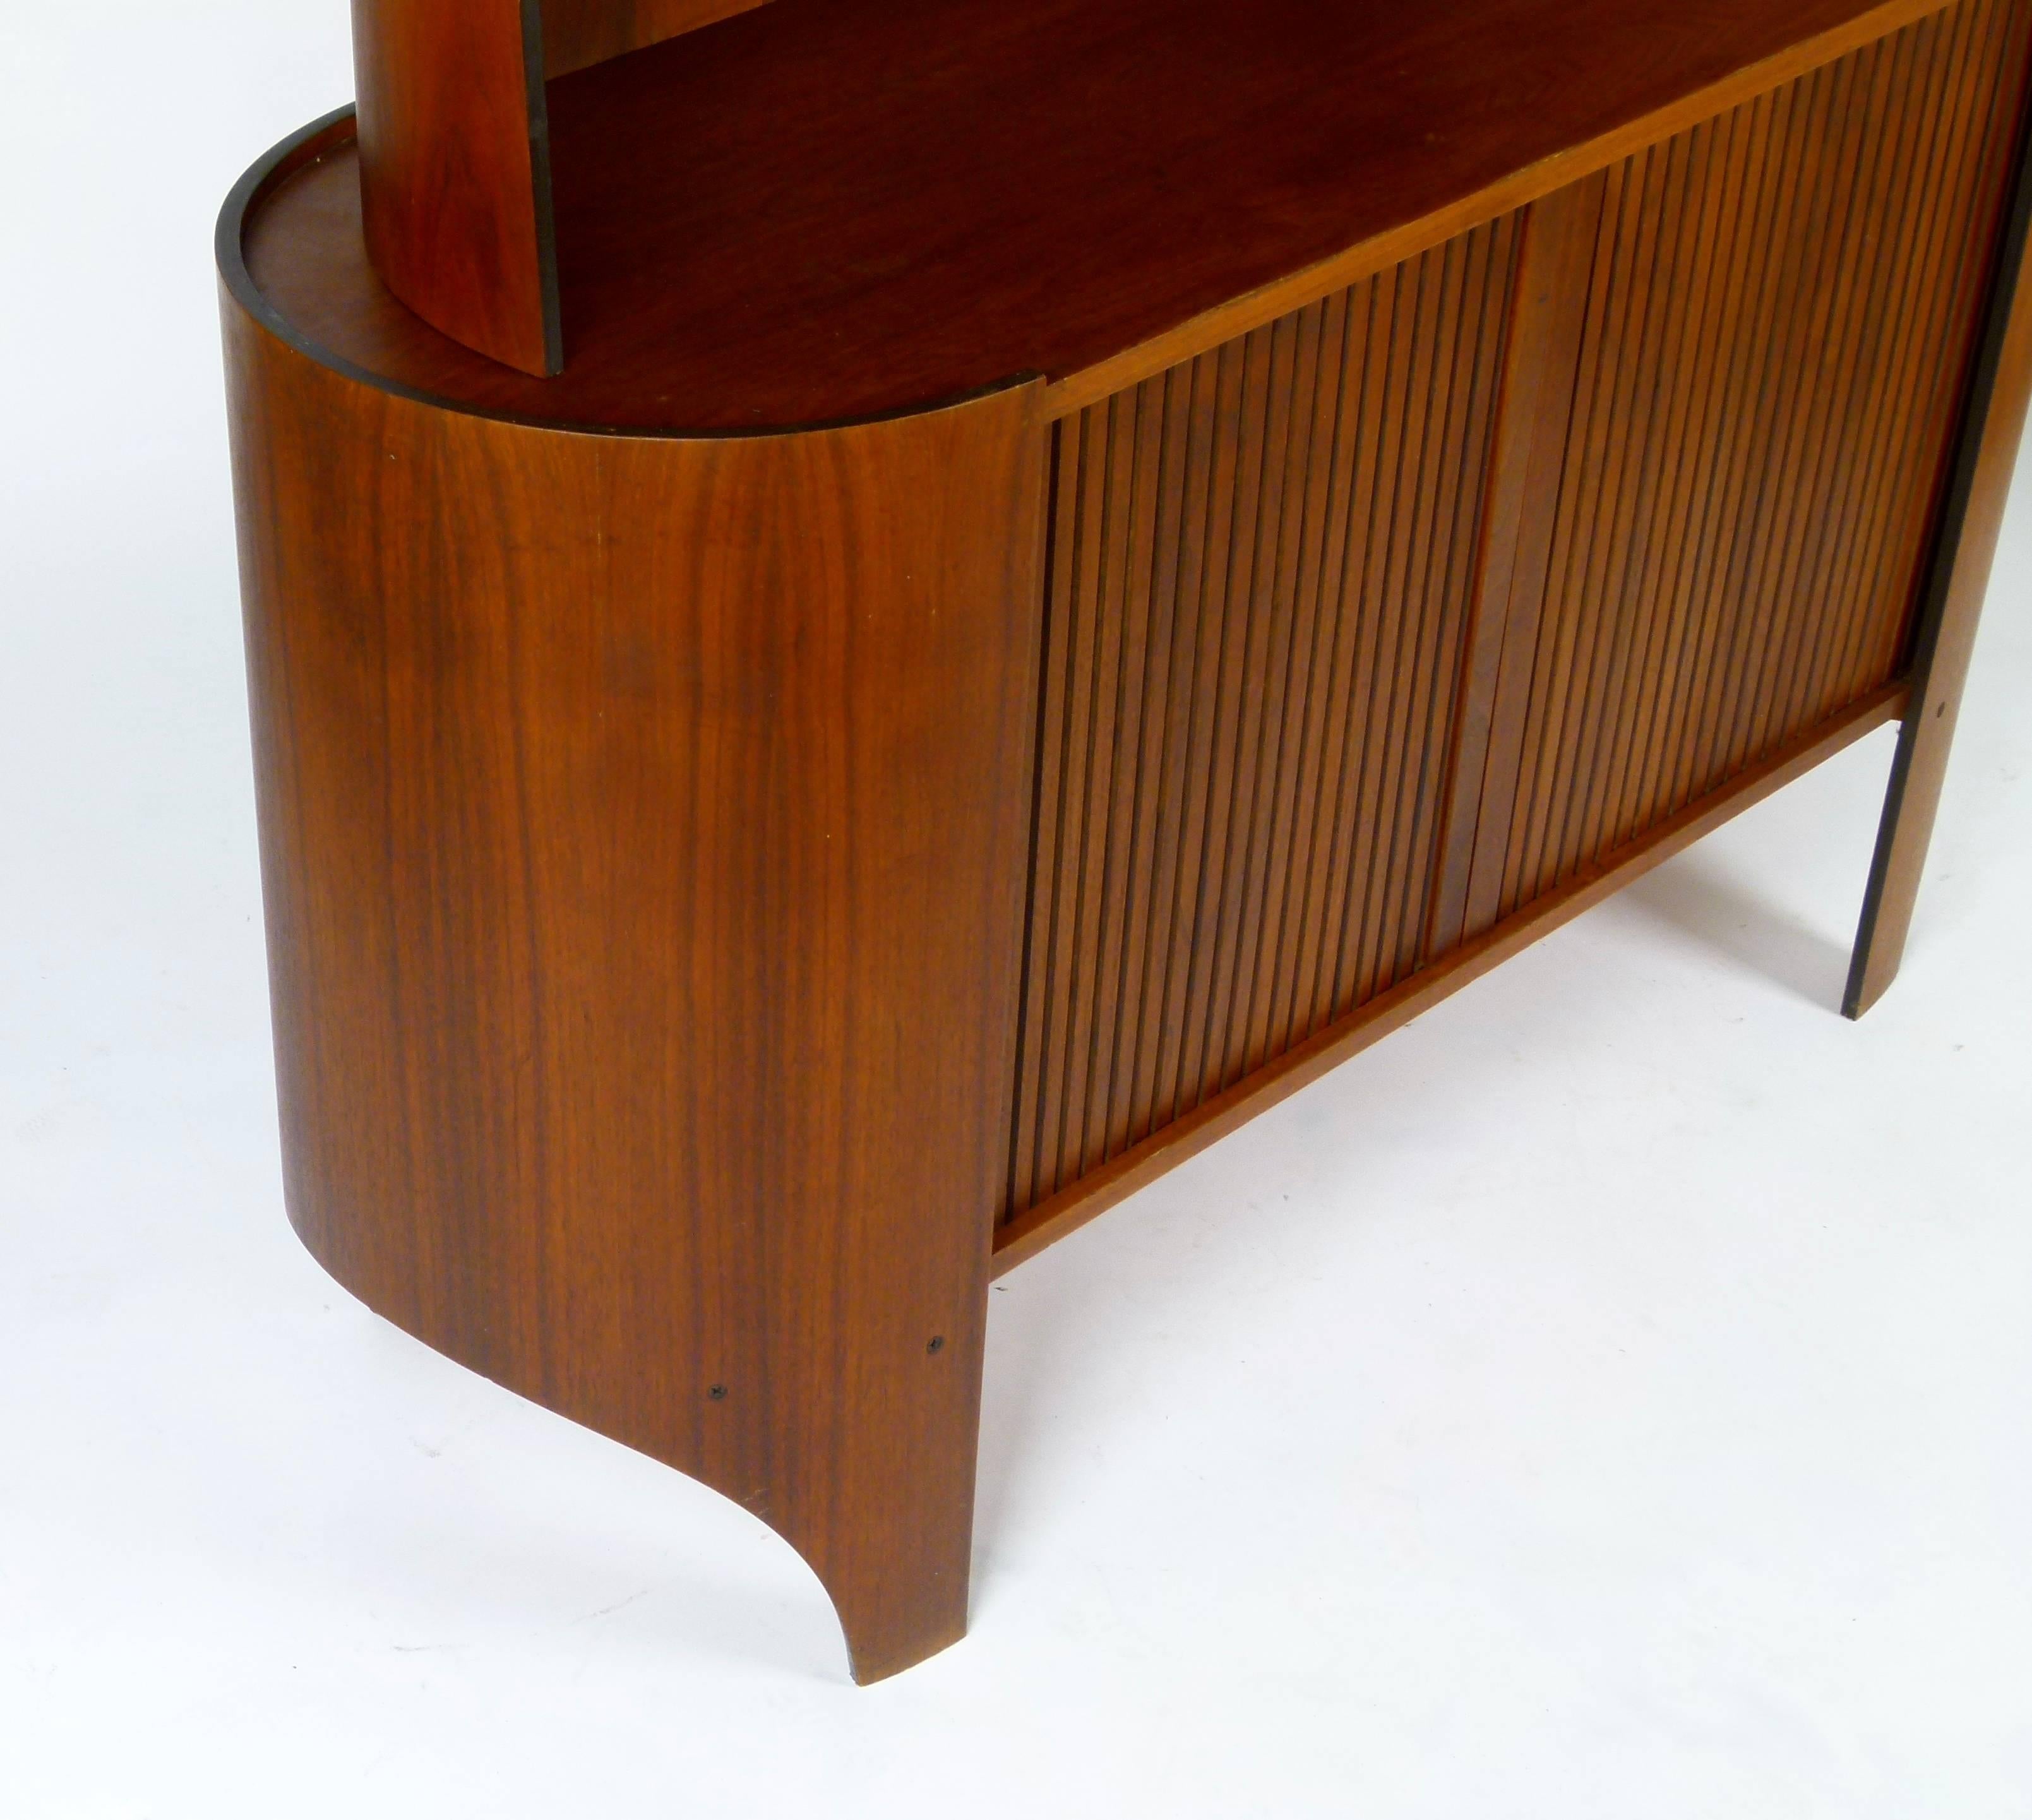 1960s sculptural display cabinet in walnut designed by Henry Glass for his 